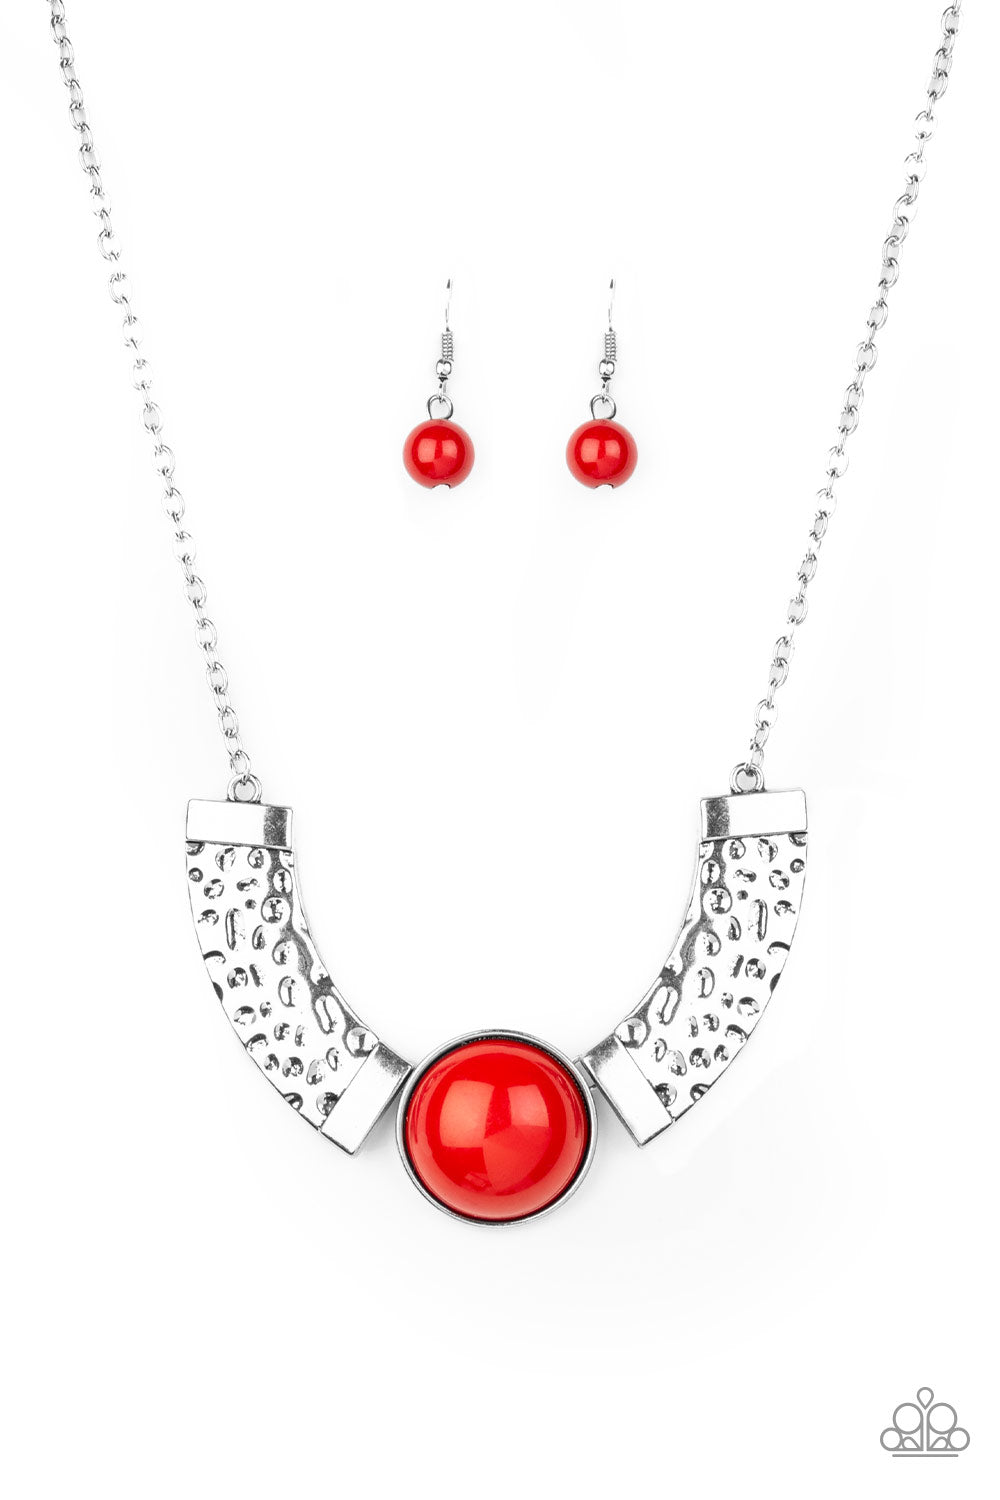 Paparazzi Necklaces - Egyptian Spell - Red